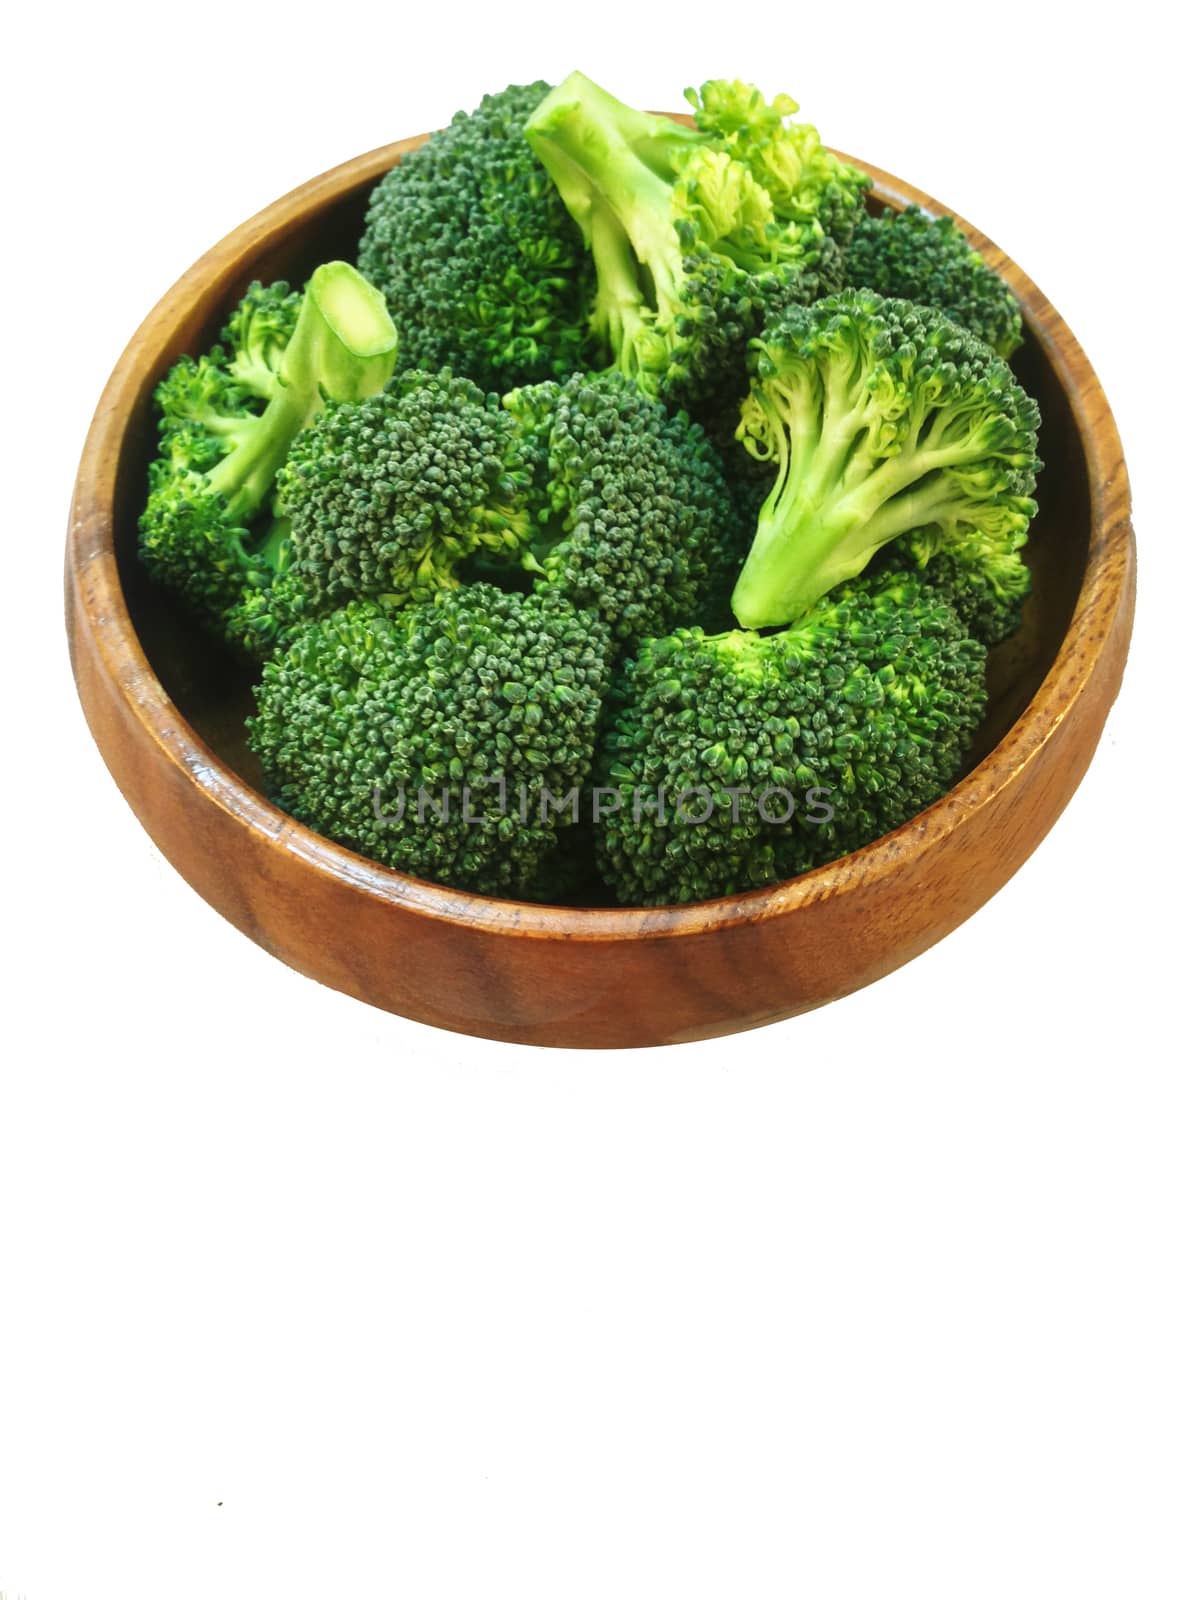 Broccoli in wooden bowl on white background by Bowonpat